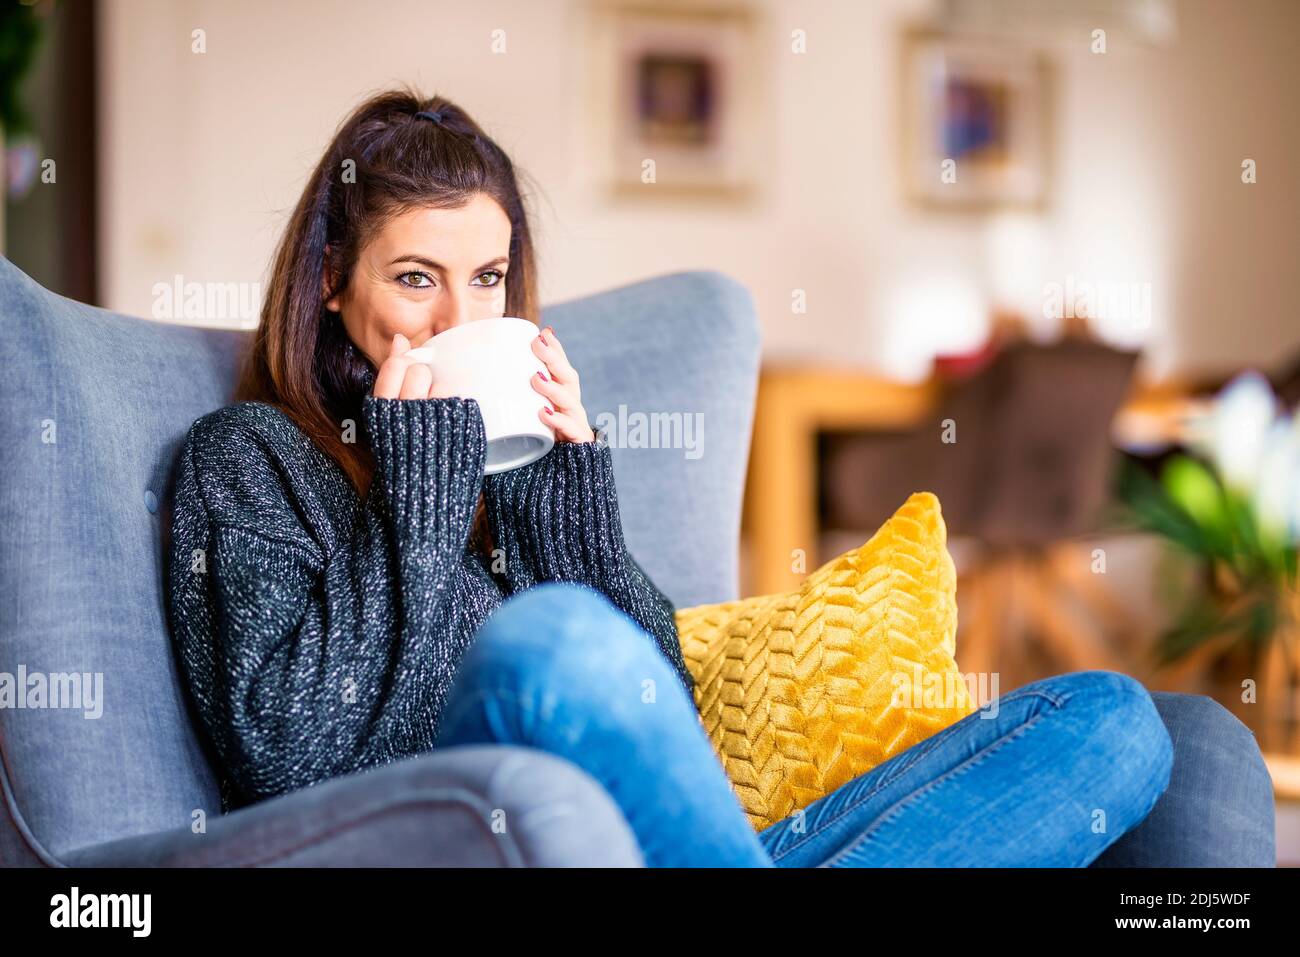 Portrait shot of smiling woman drinking tea while relaxing in the armchair at home. Stock Photo